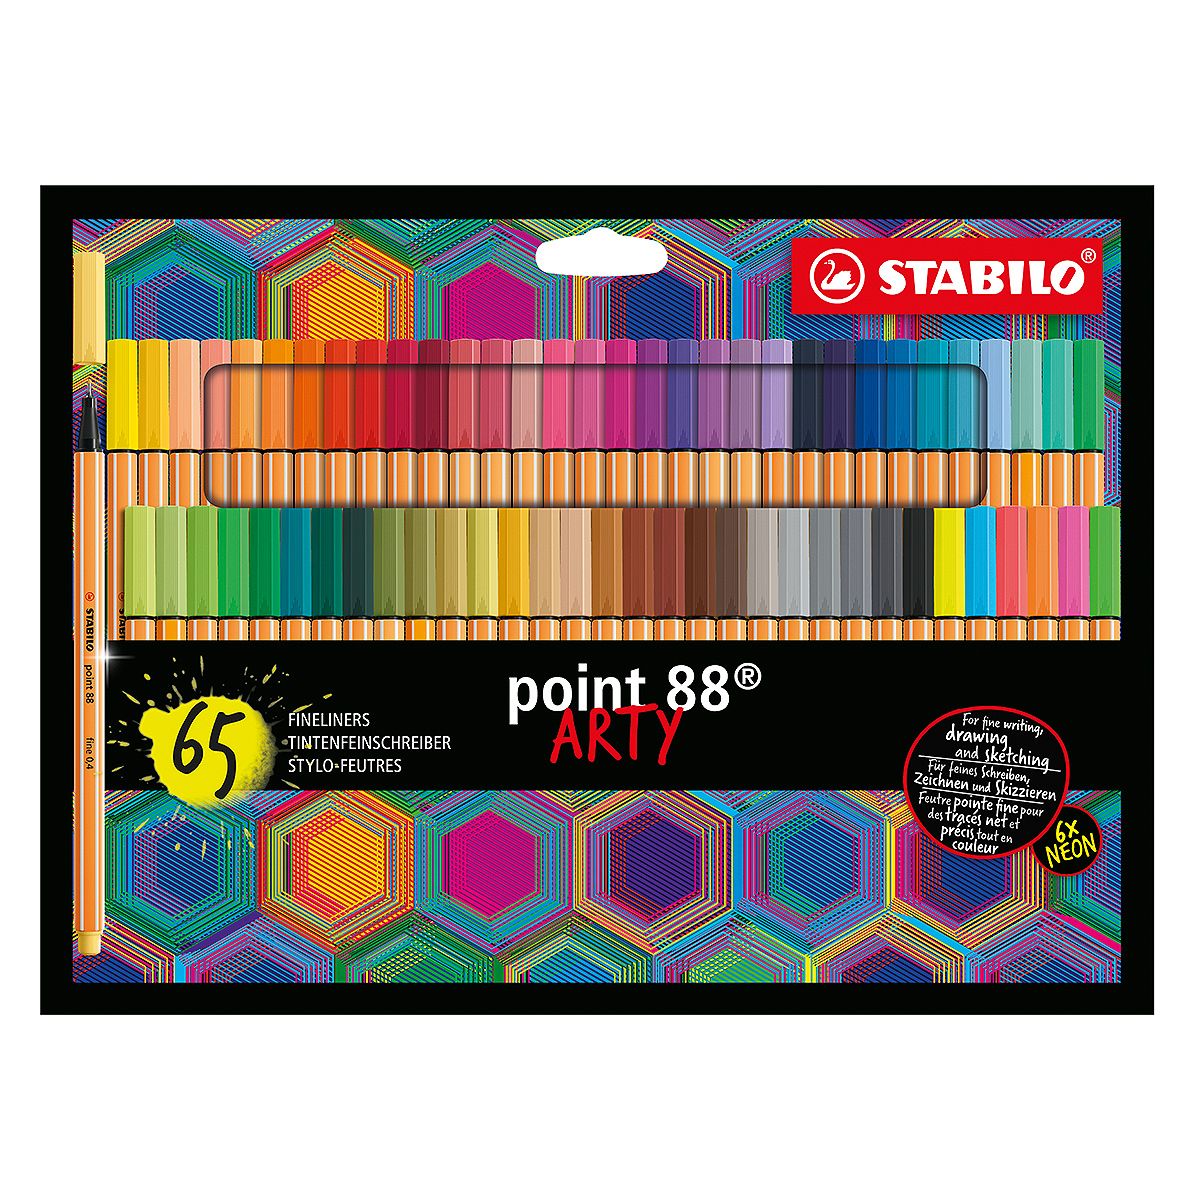 Fineliner STABILO point 88 - pack of 30 colors